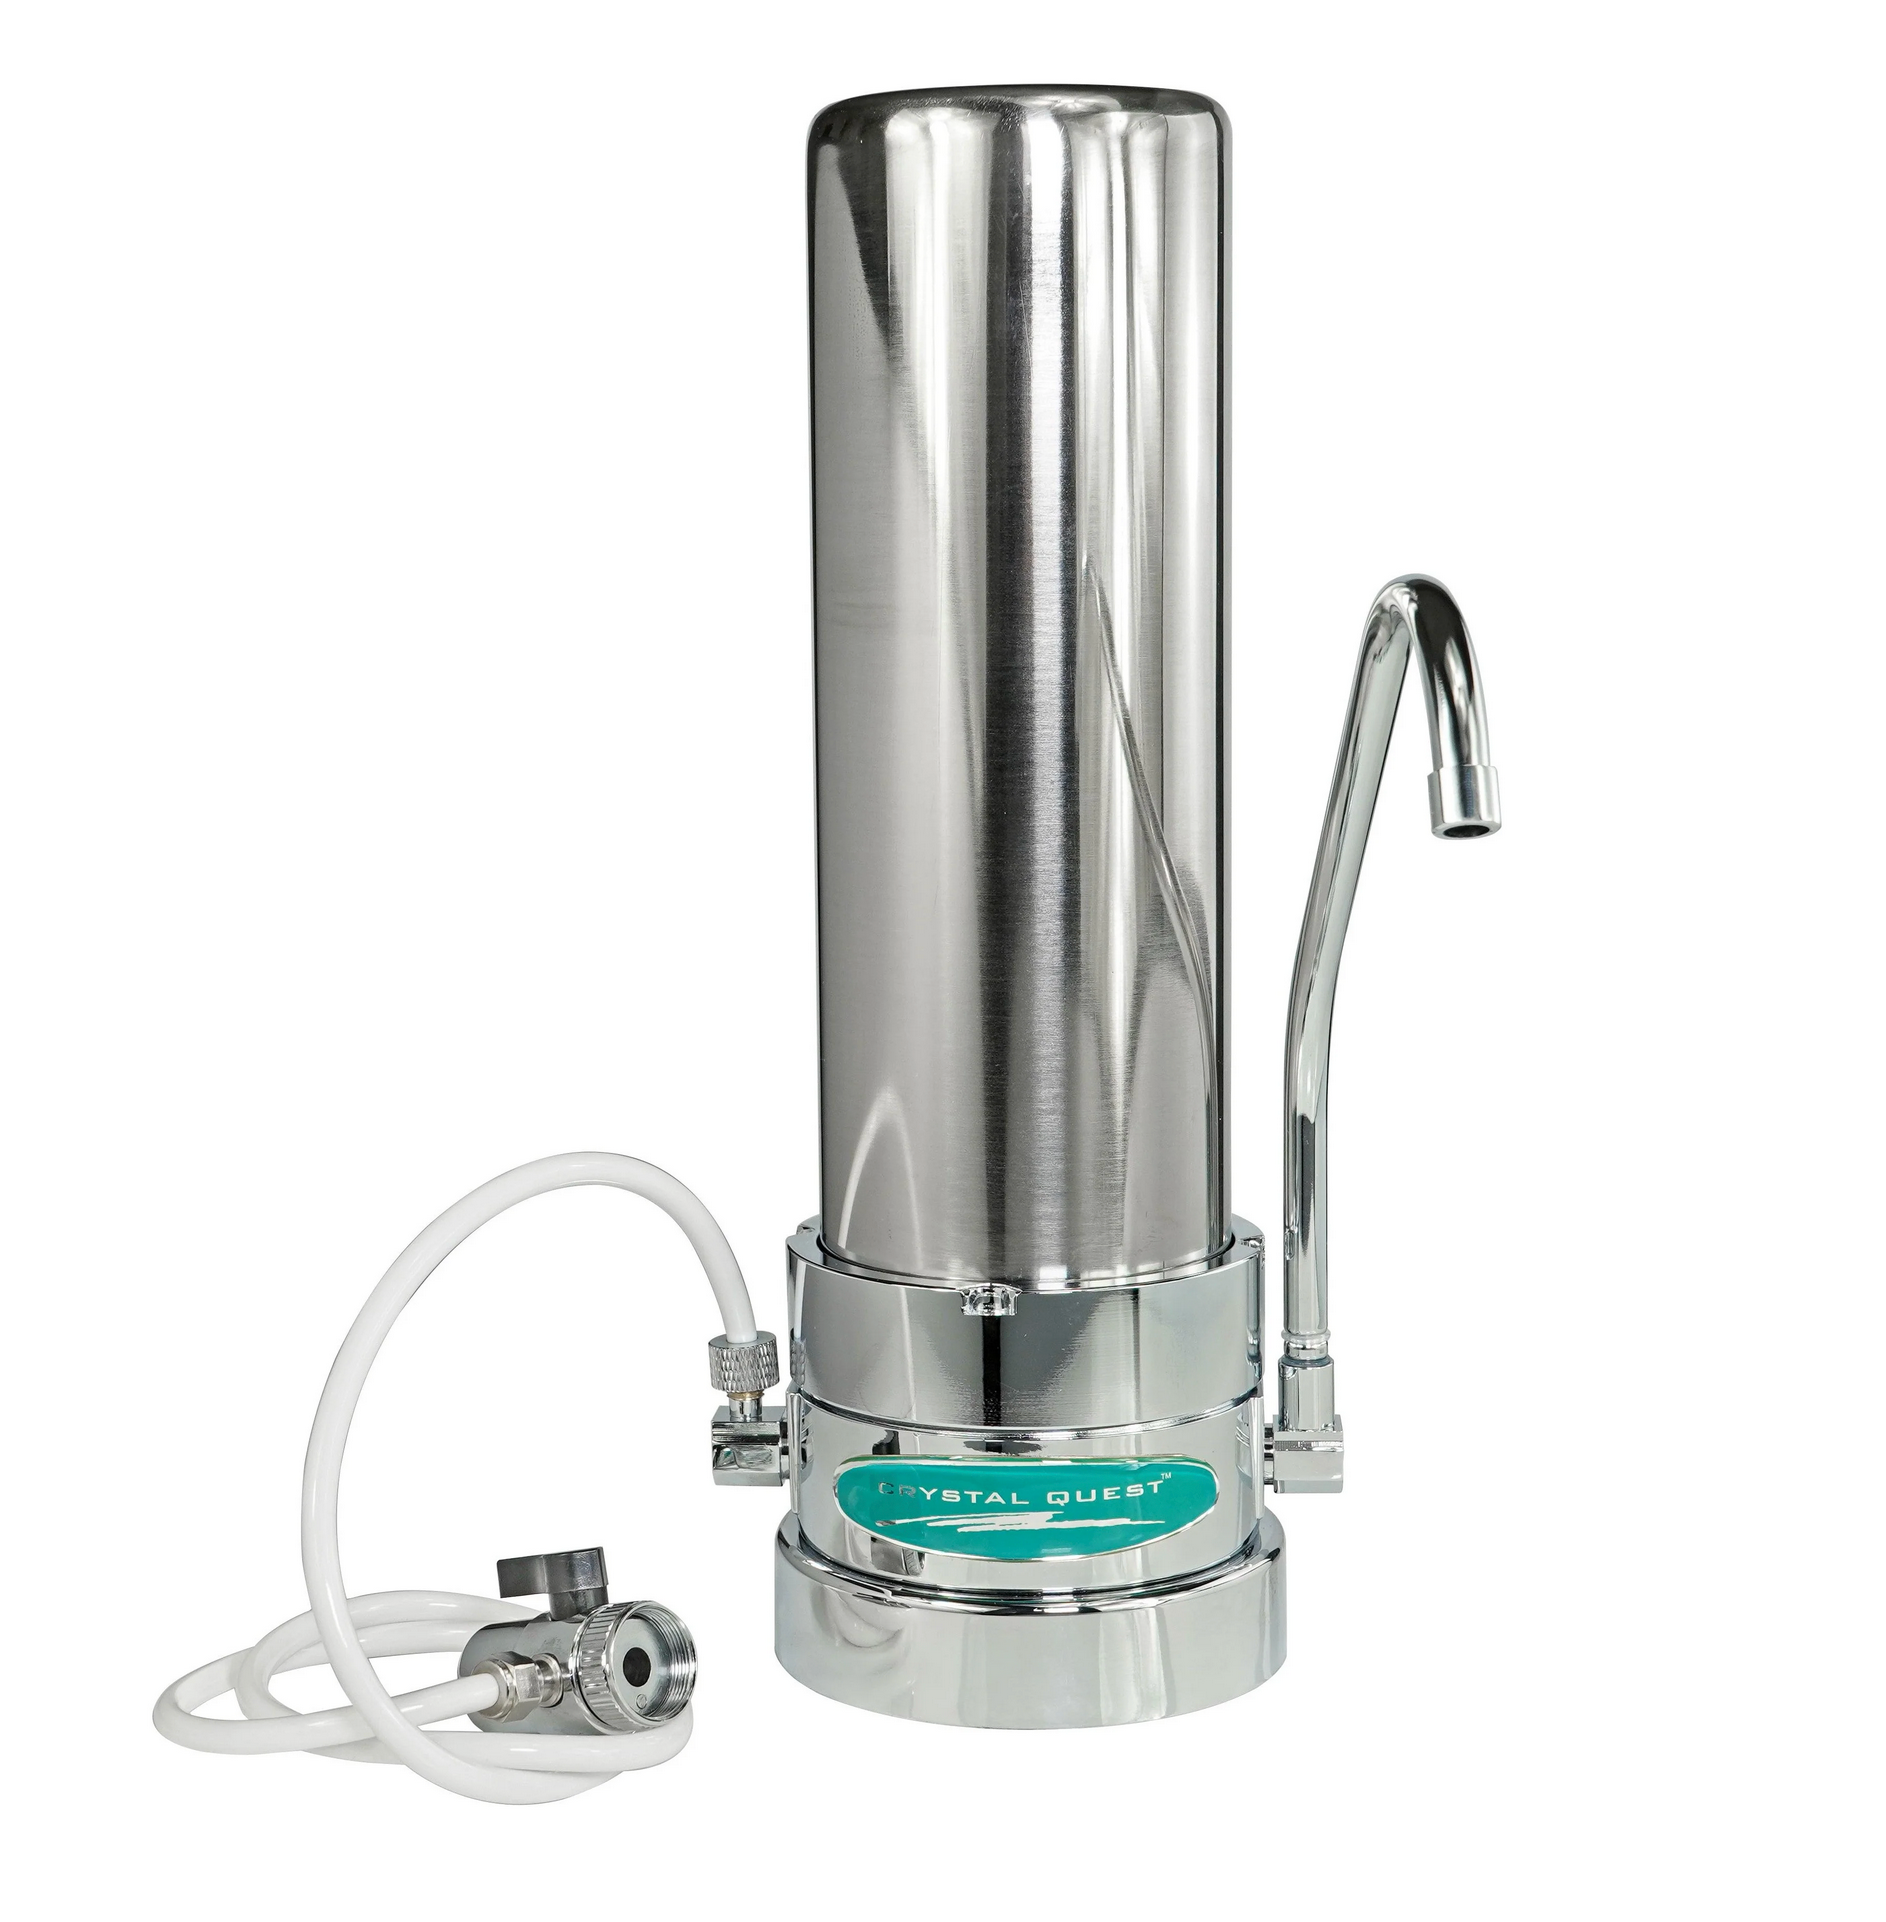 Nitrate Under Sink Water Filter, Water Filter System